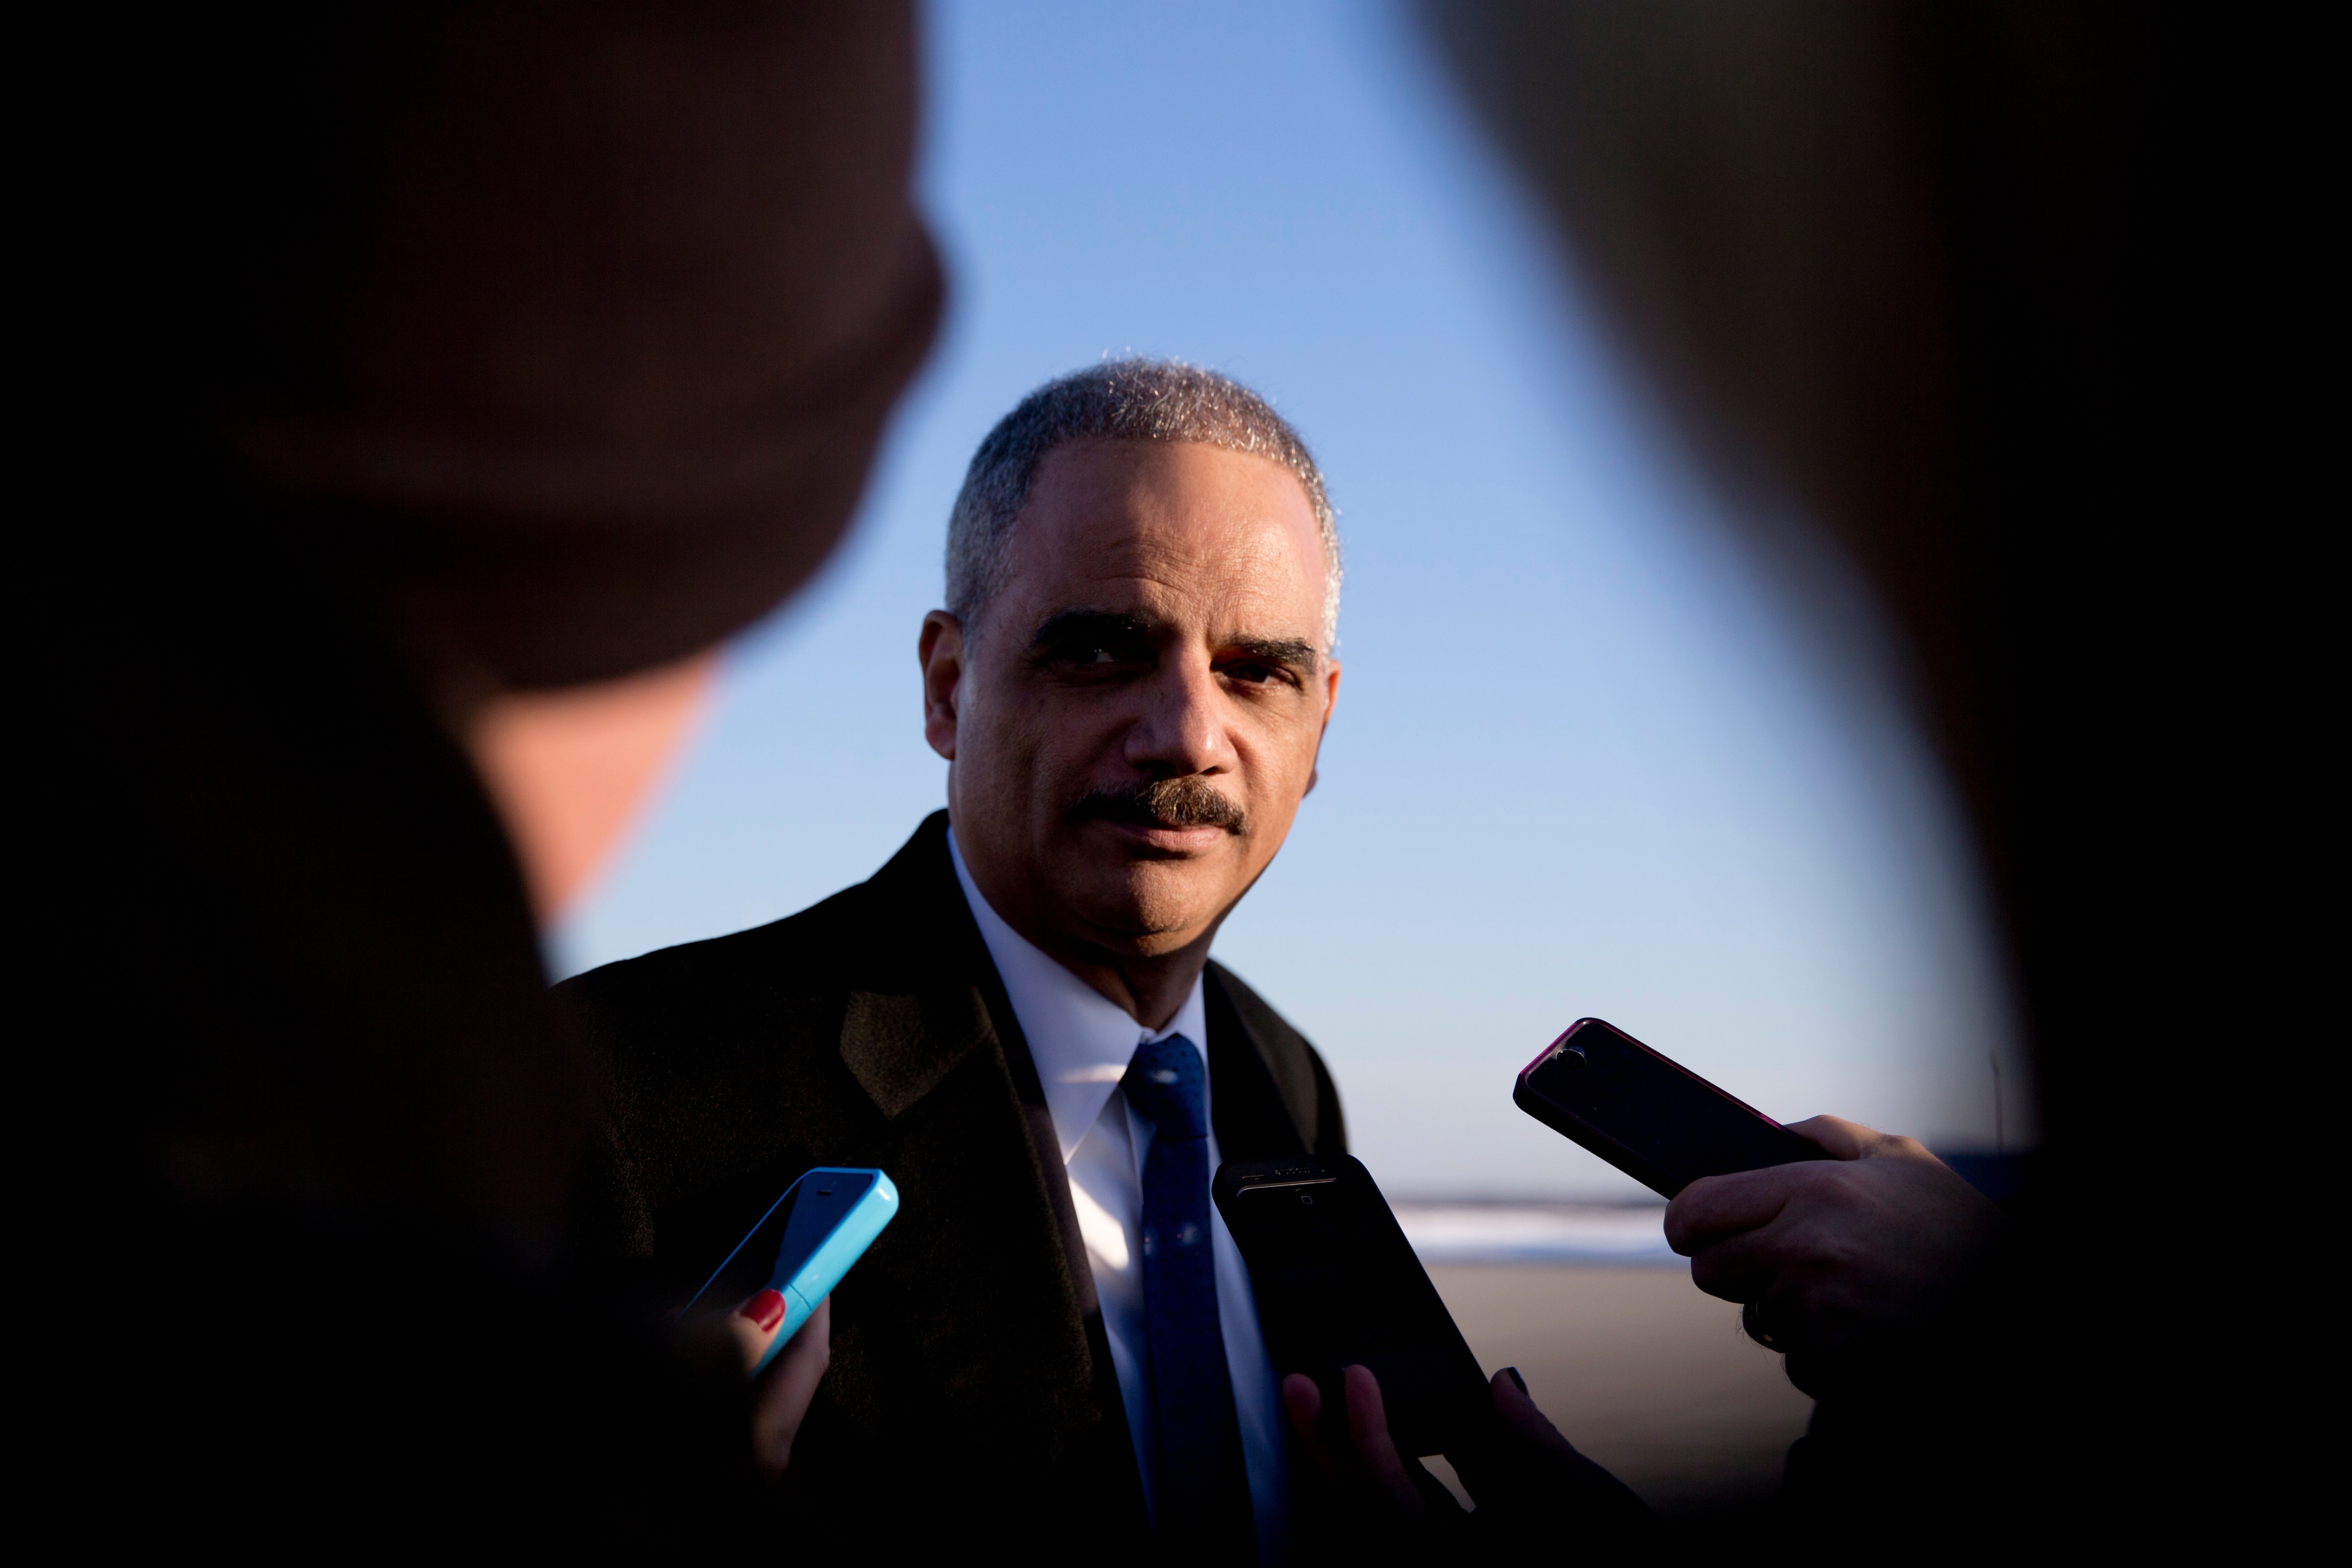 Attorney General Eric Holder talks with media as he arrives on Air Force One in Andrews Air Force Base, Md. on March 6, 2015, with President Barack Obama, from Columbia, S.C.